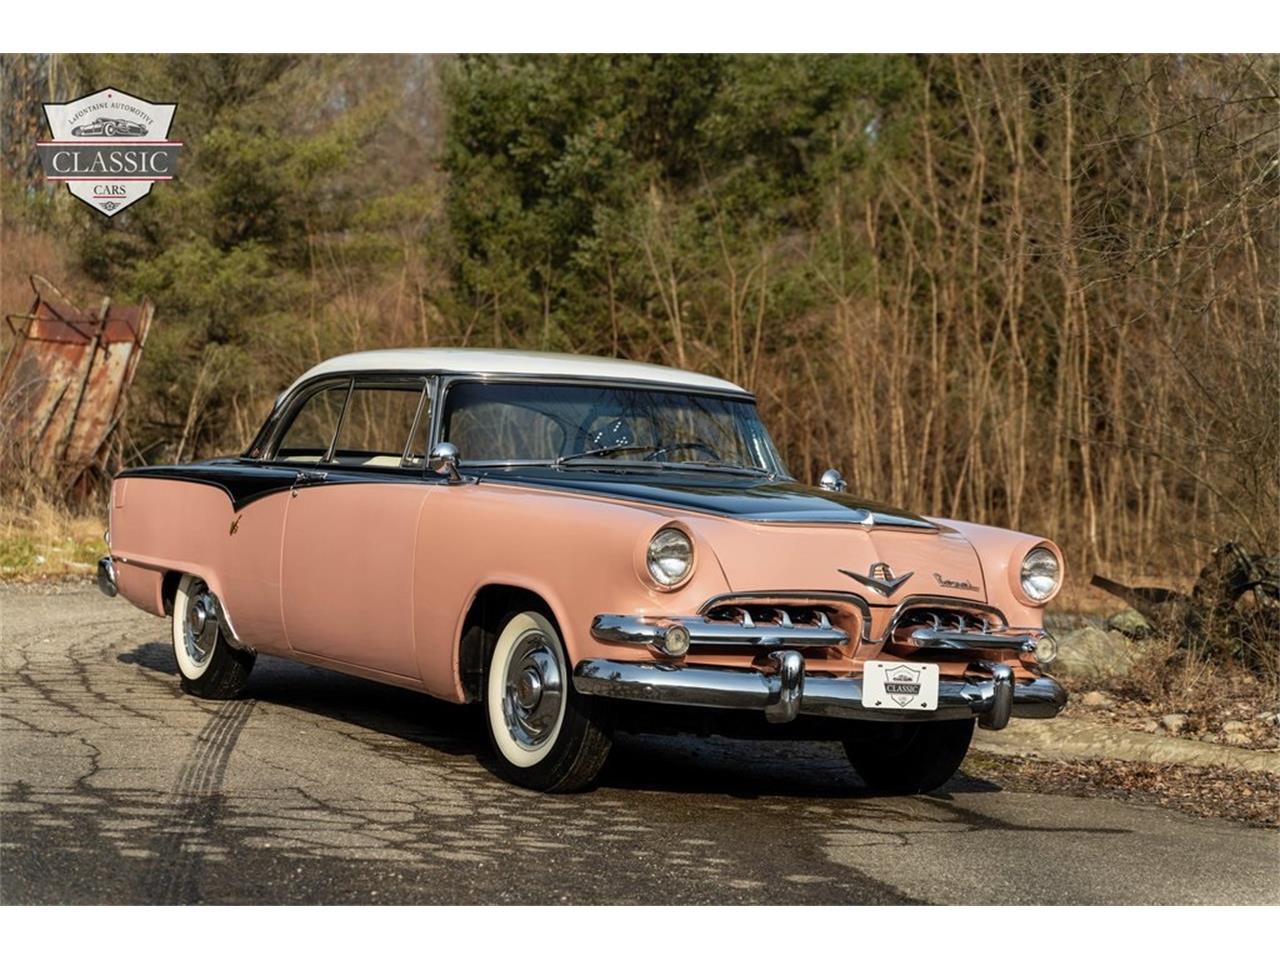 For Sale: 1955 Dodge Royal Lancer in Milford, Michigan for sale in Milford, MI